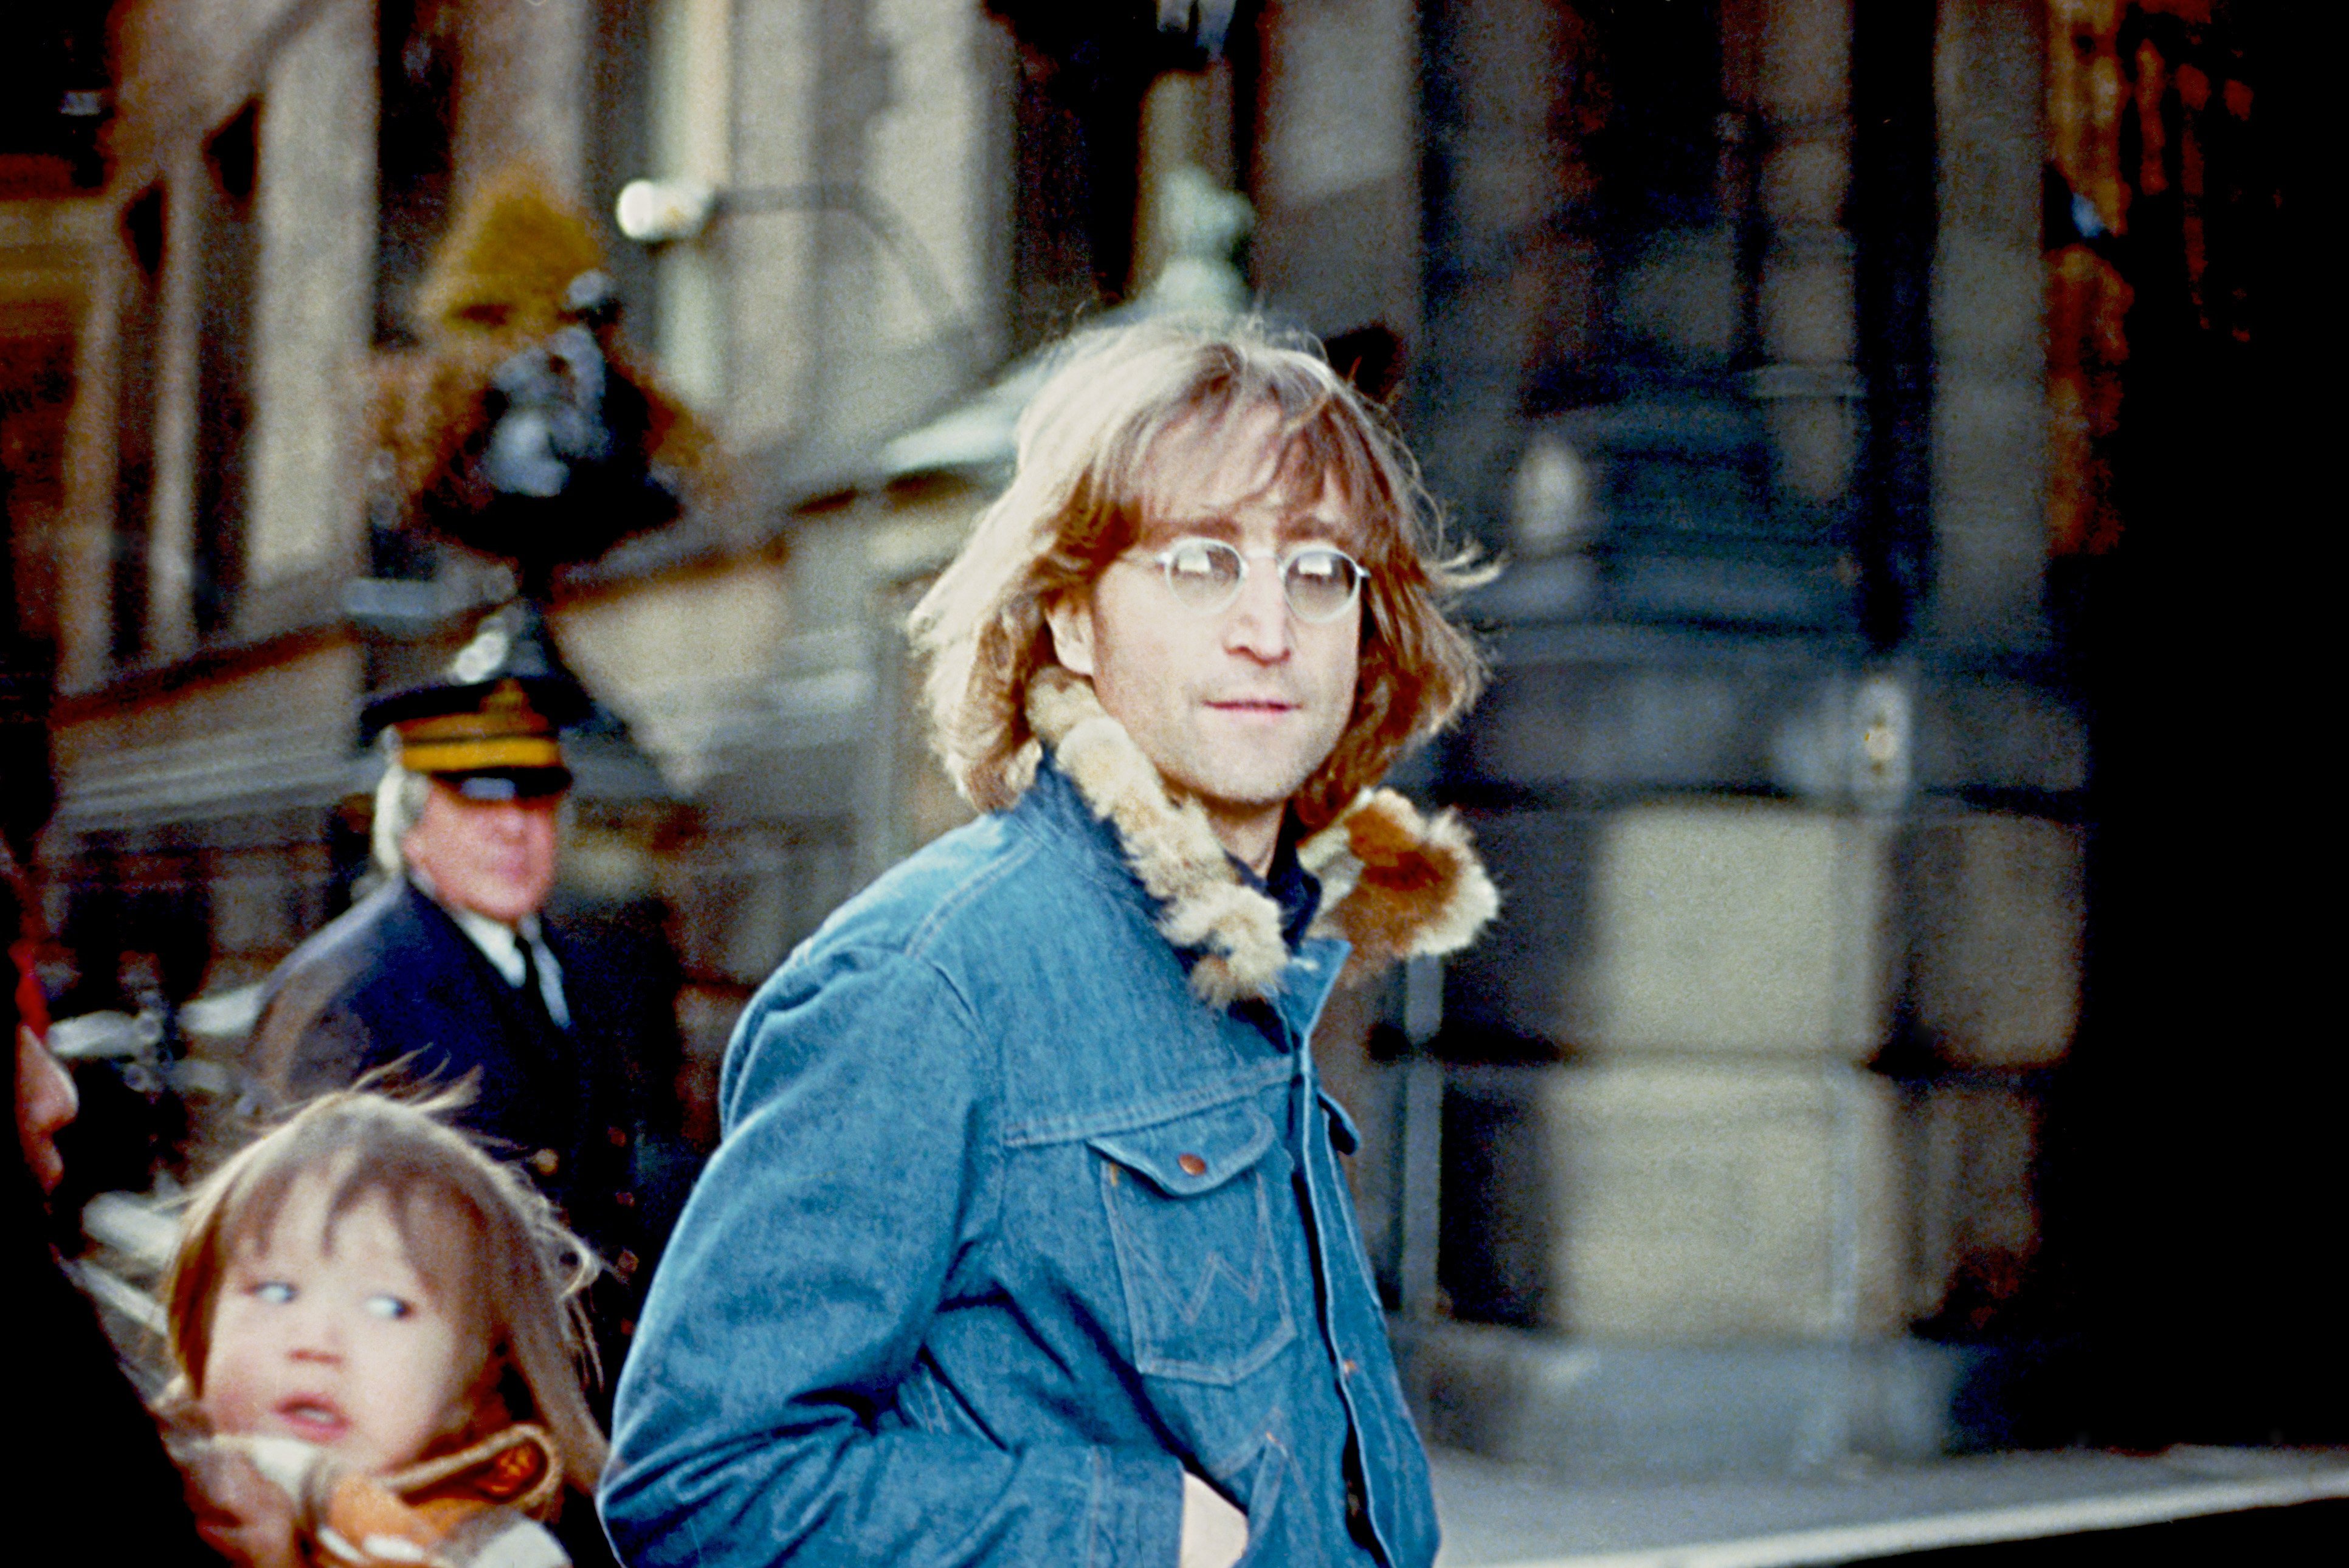 John Lennon Told His Son He’s ‘Looking Out’ for Him Whenever He Sees a White Feather